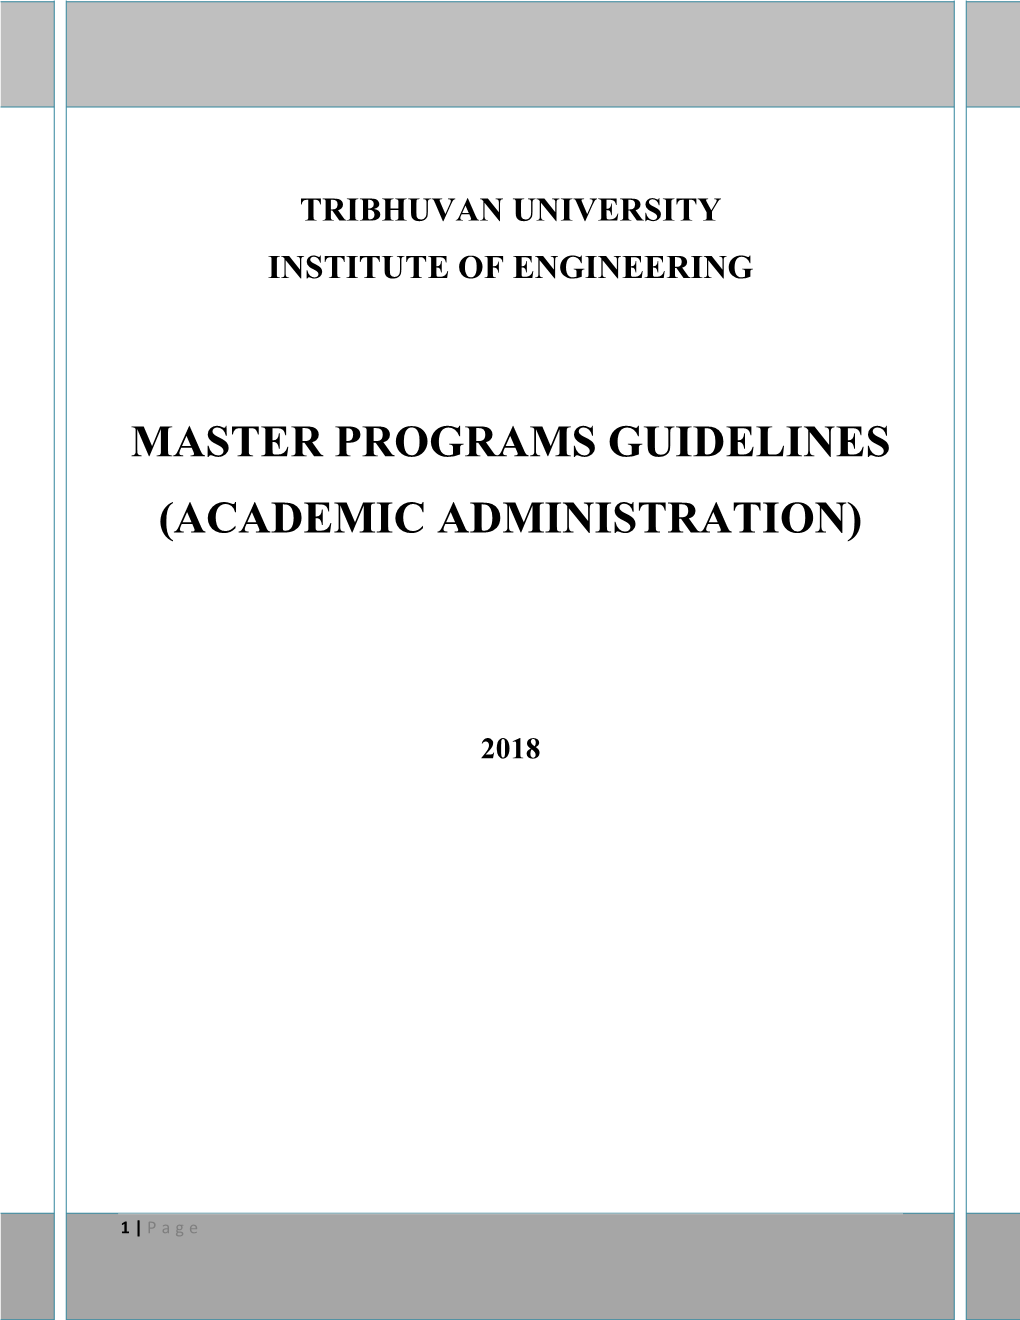 Master Programs Guidelines (Academic Administration)